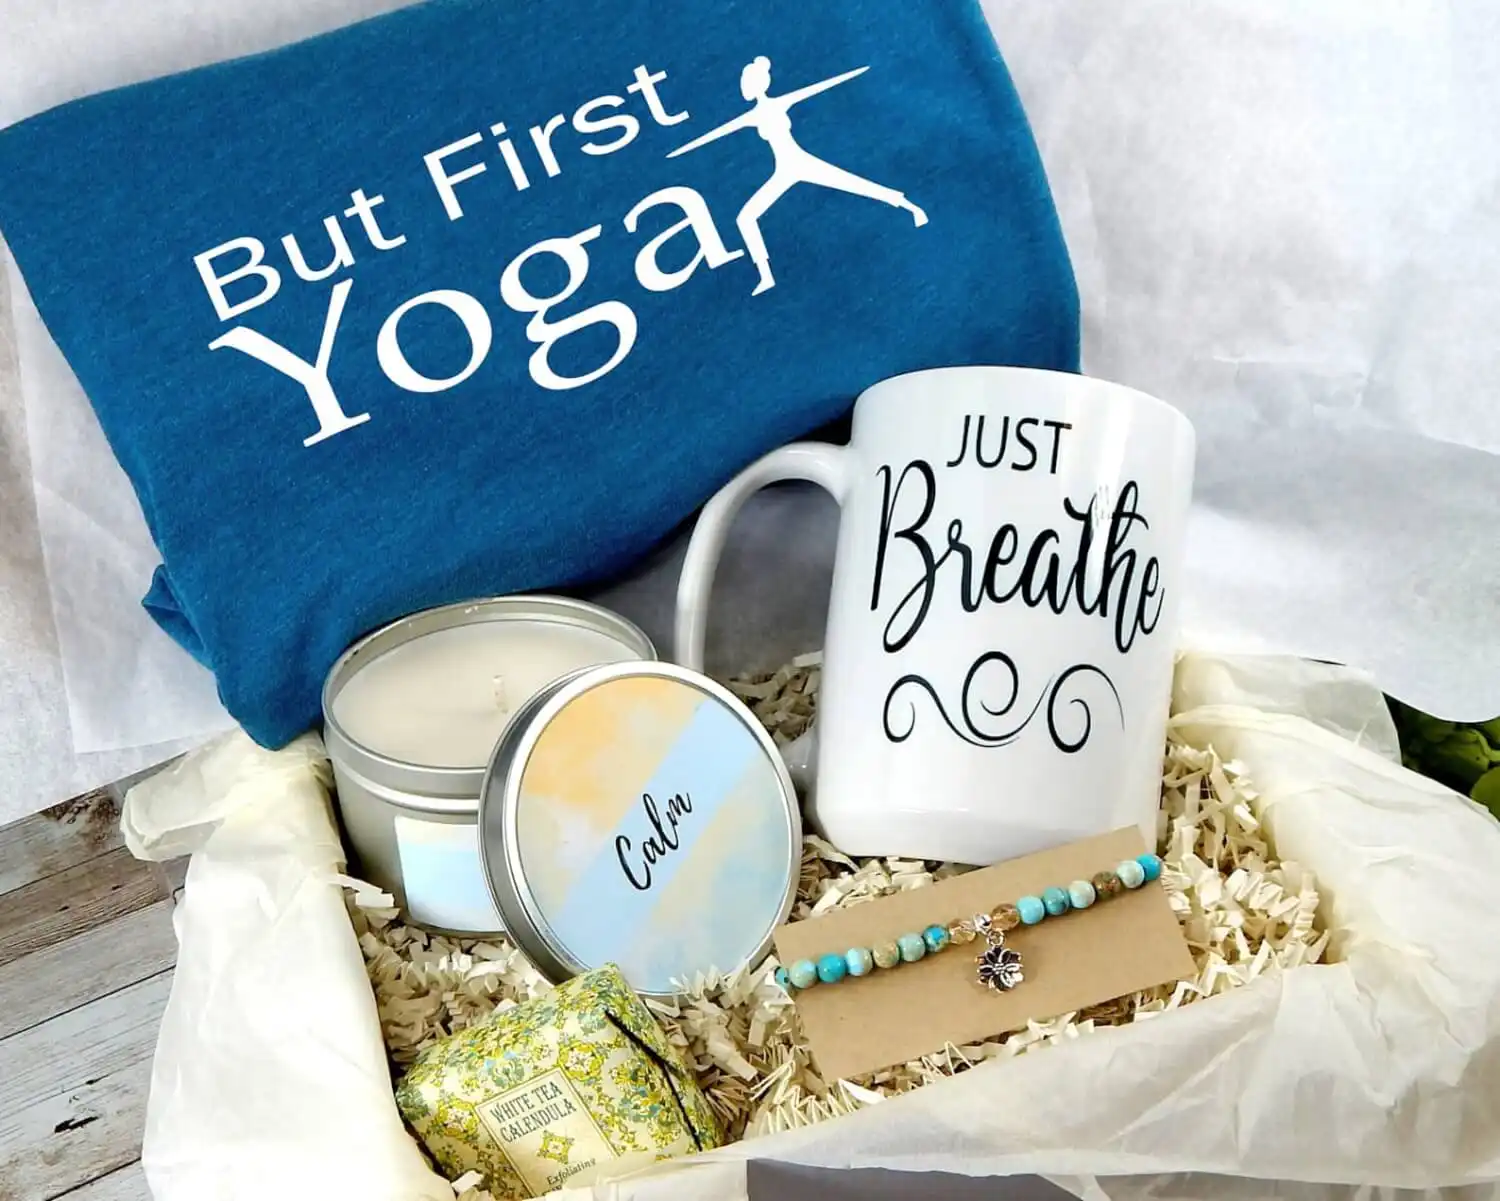 This Awesome Yoga Themed Gift Basket